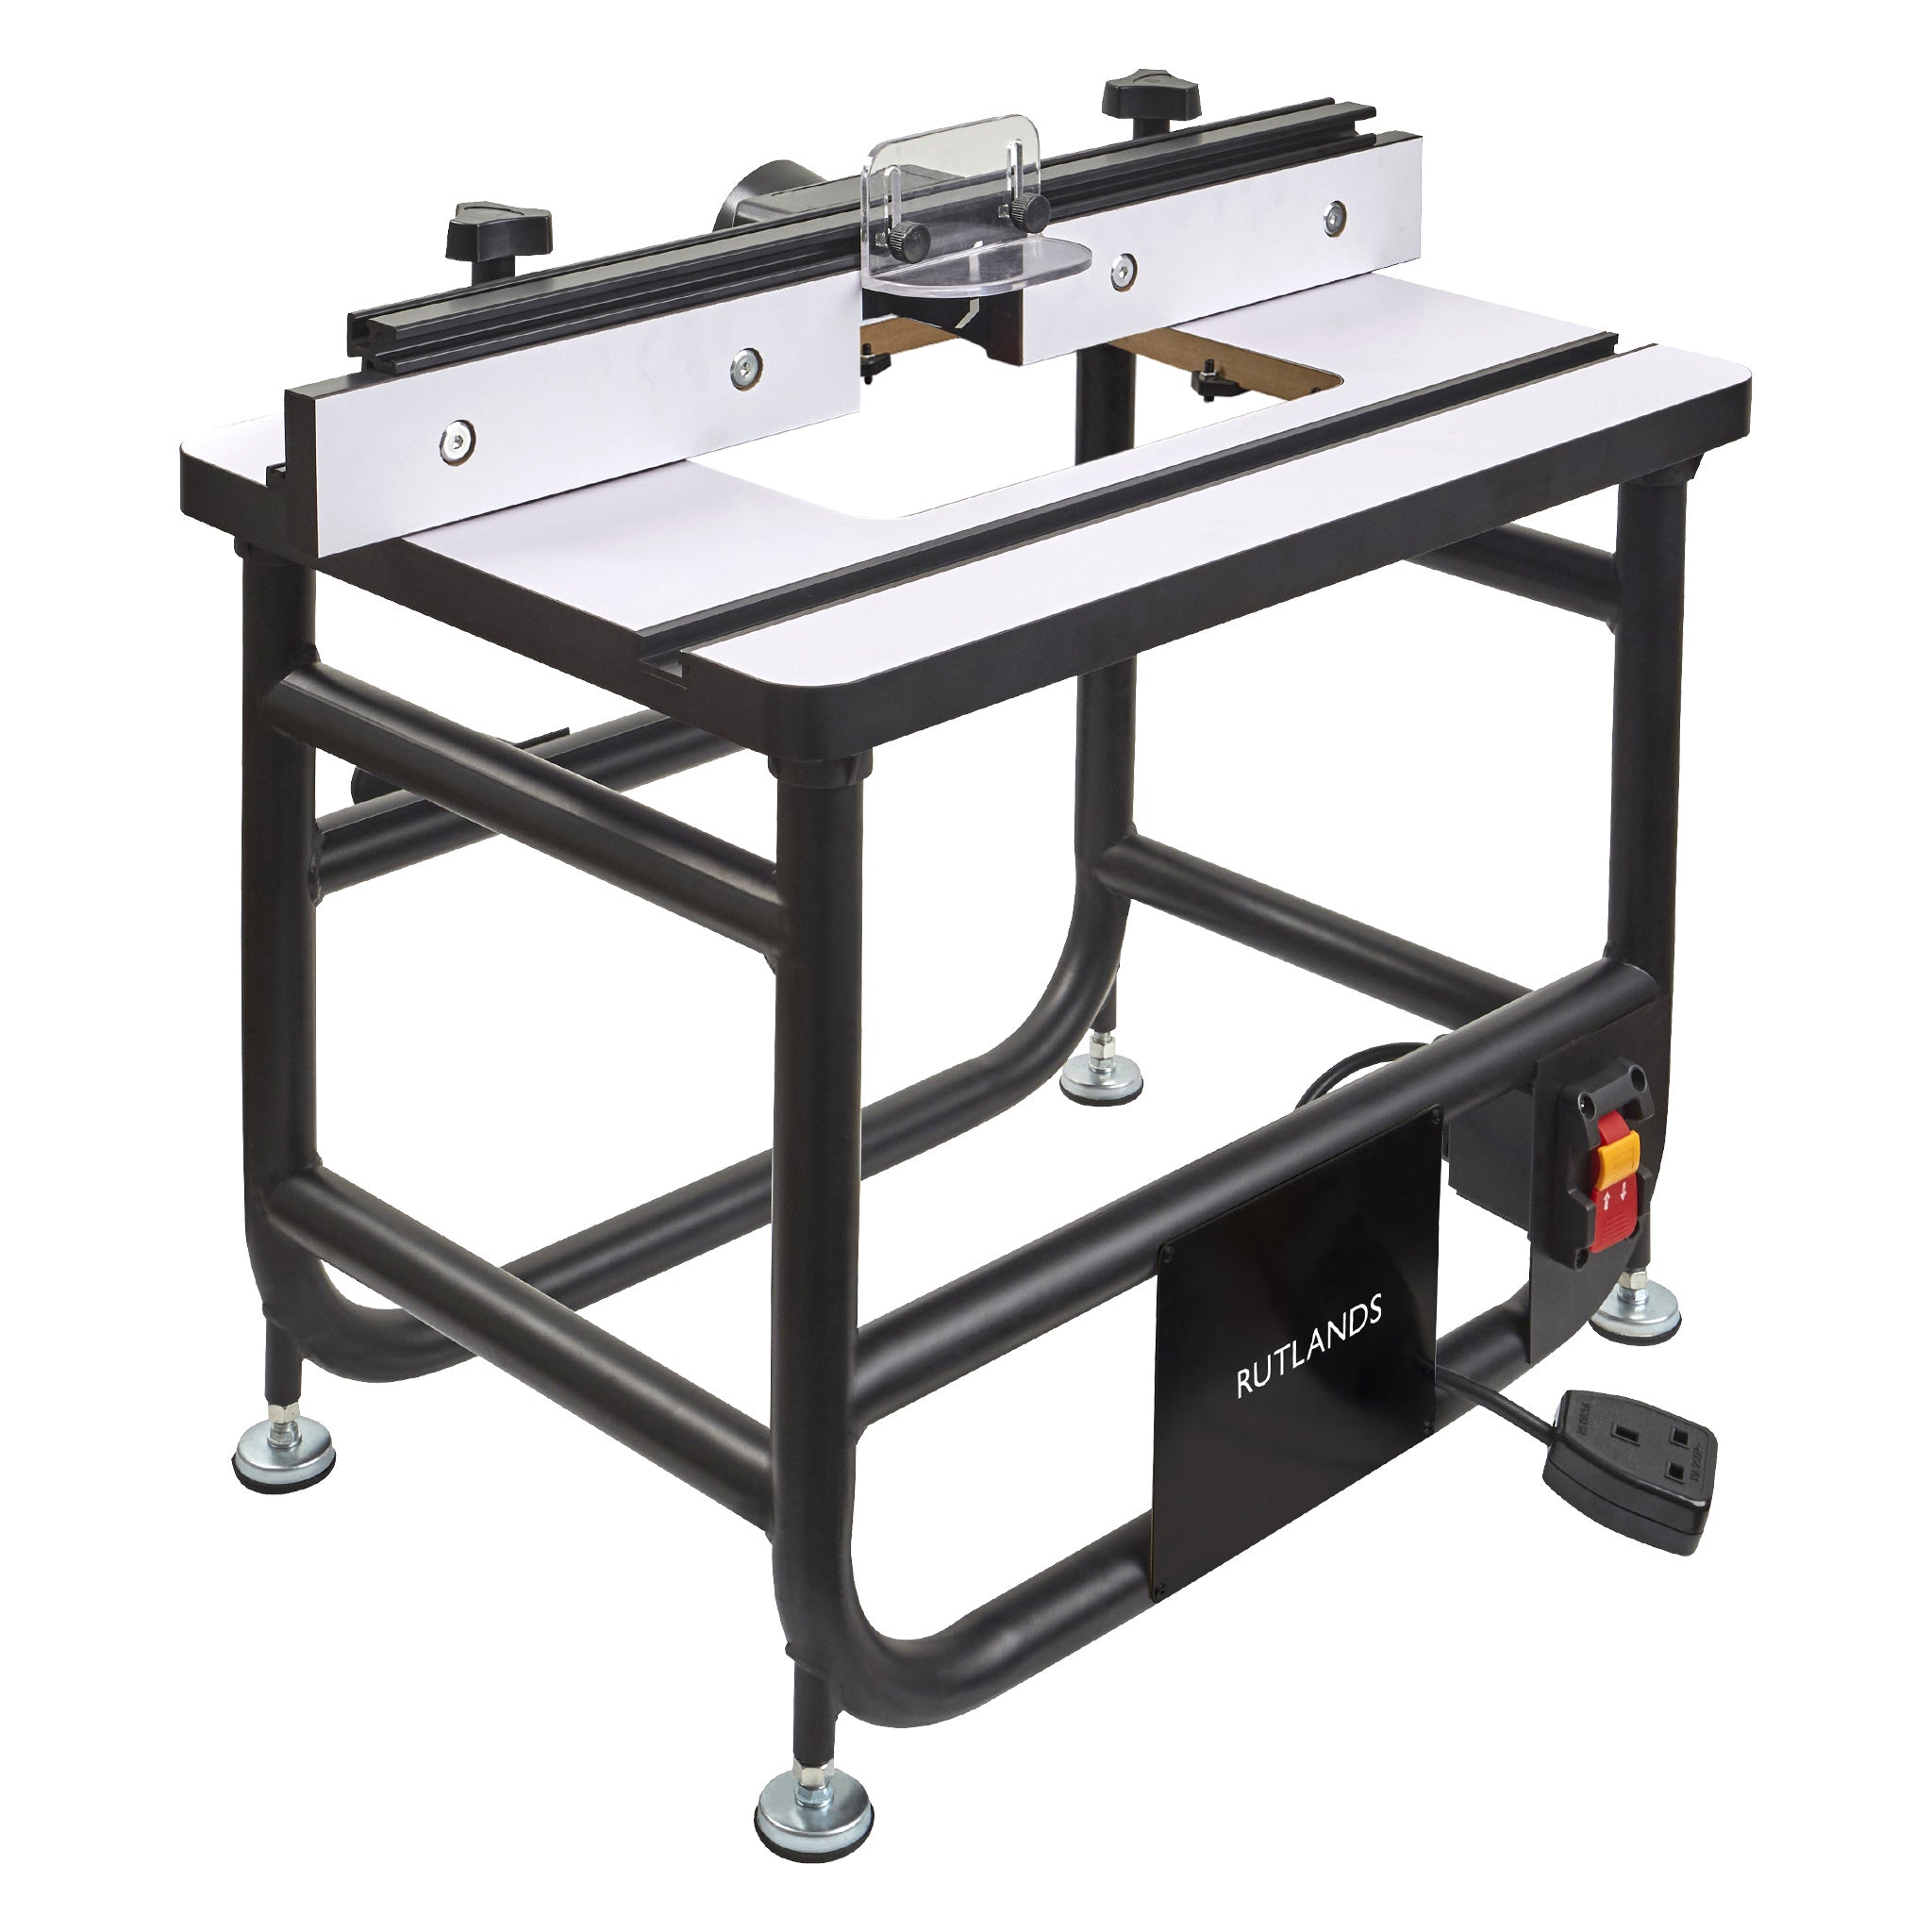 Bench Router Table - R5 Plunge Lift